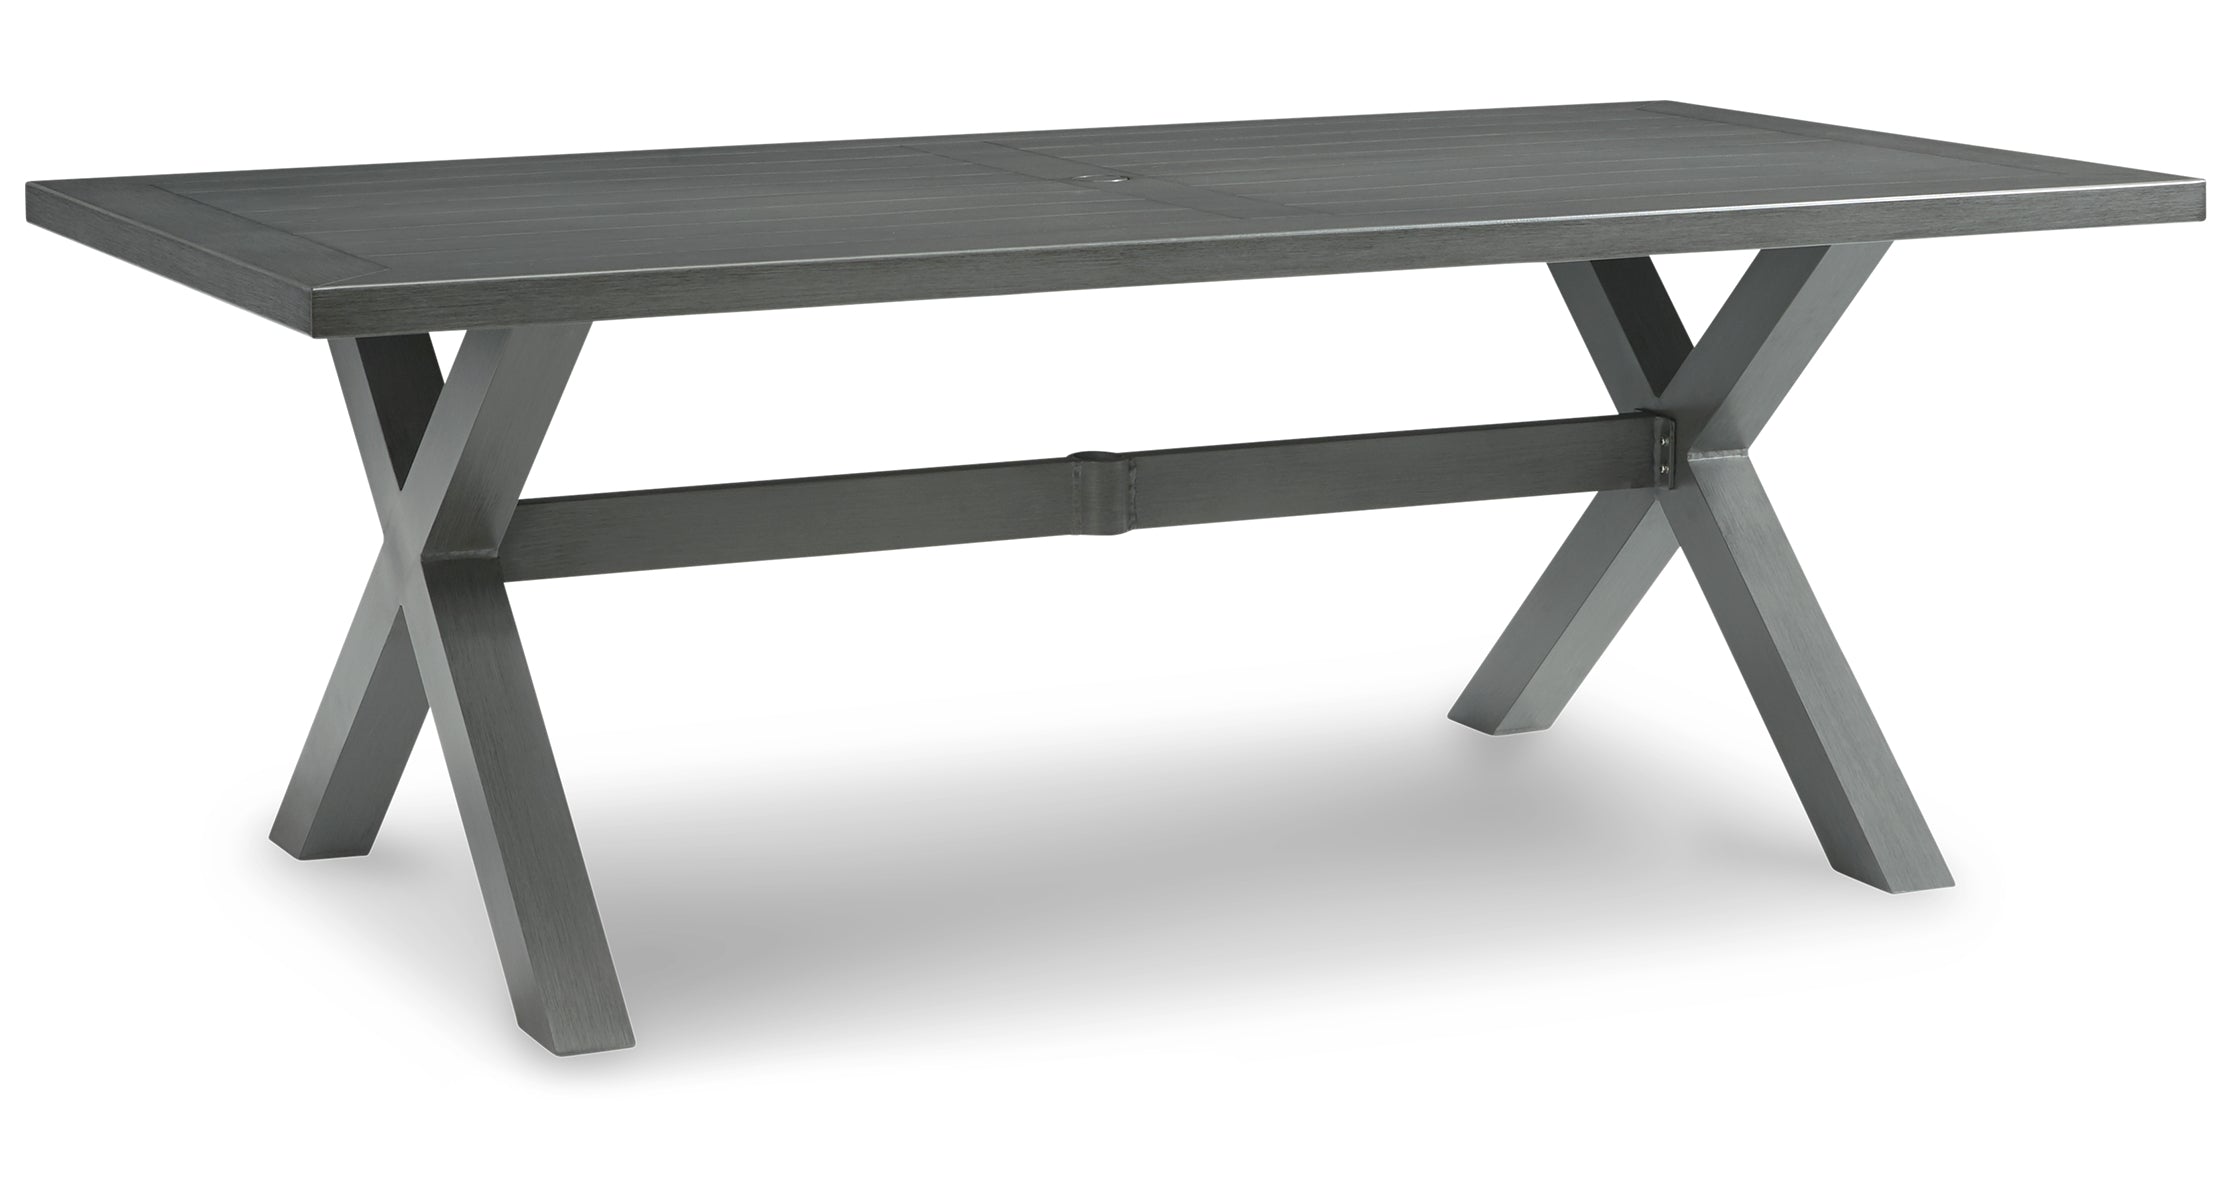 Elite Park Outdoor Dining Table